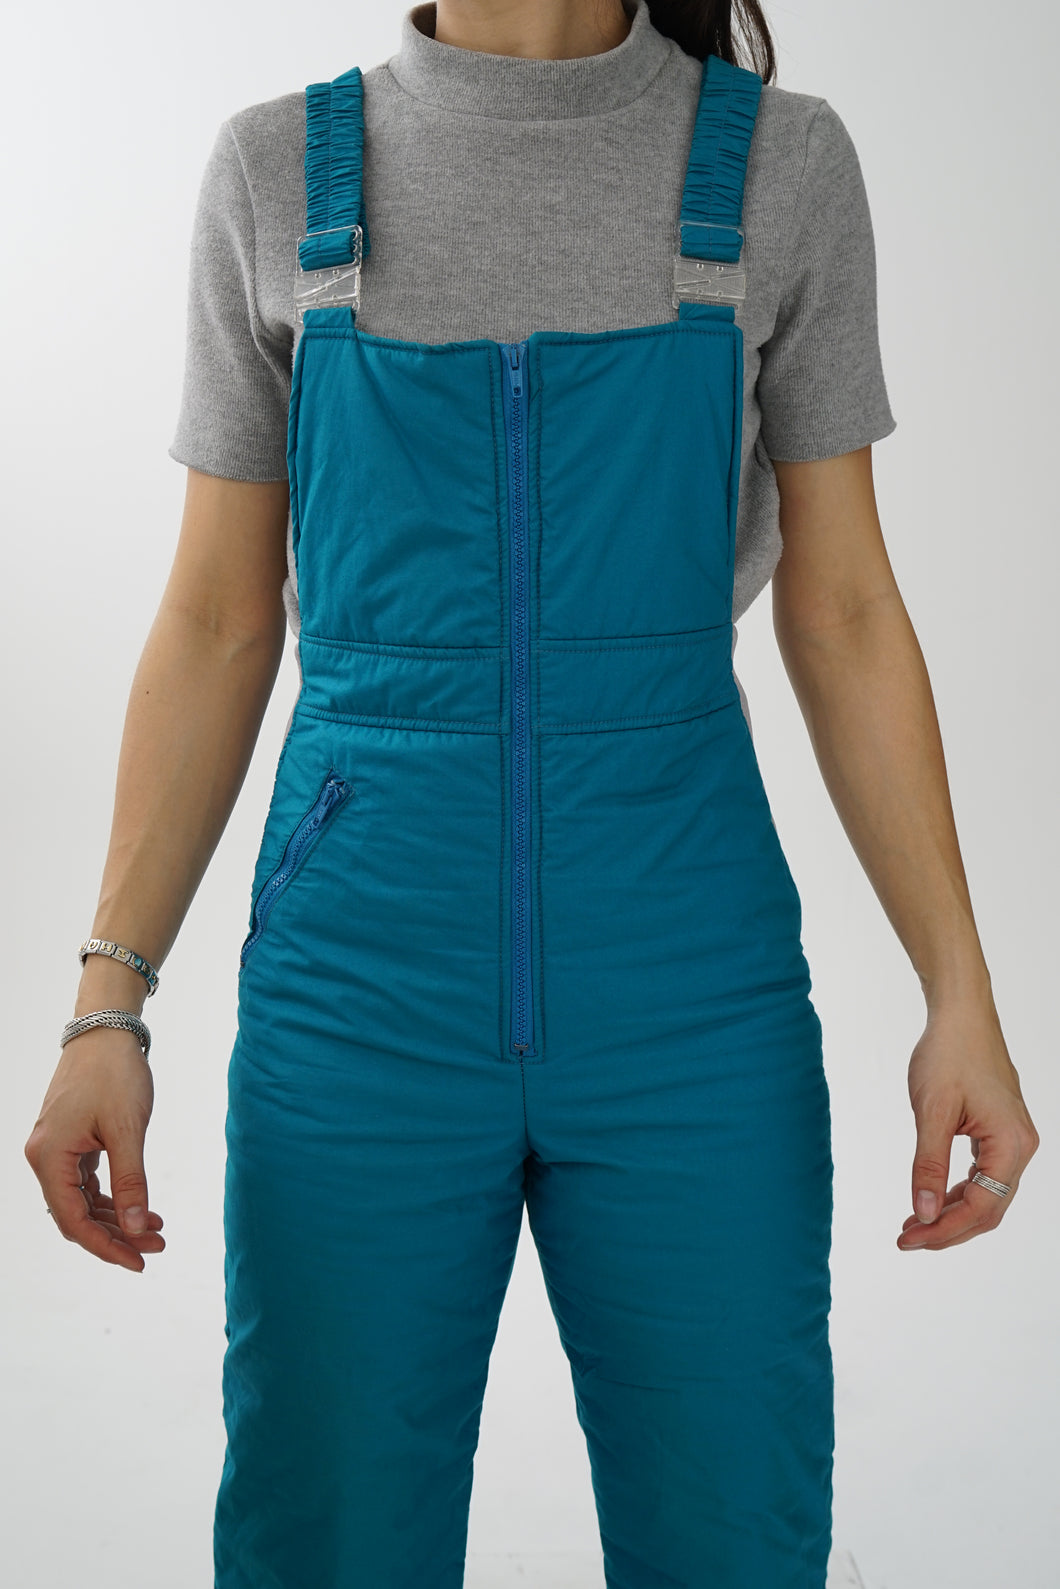 Vintage turquoise Joff overalls snow pants for women size S